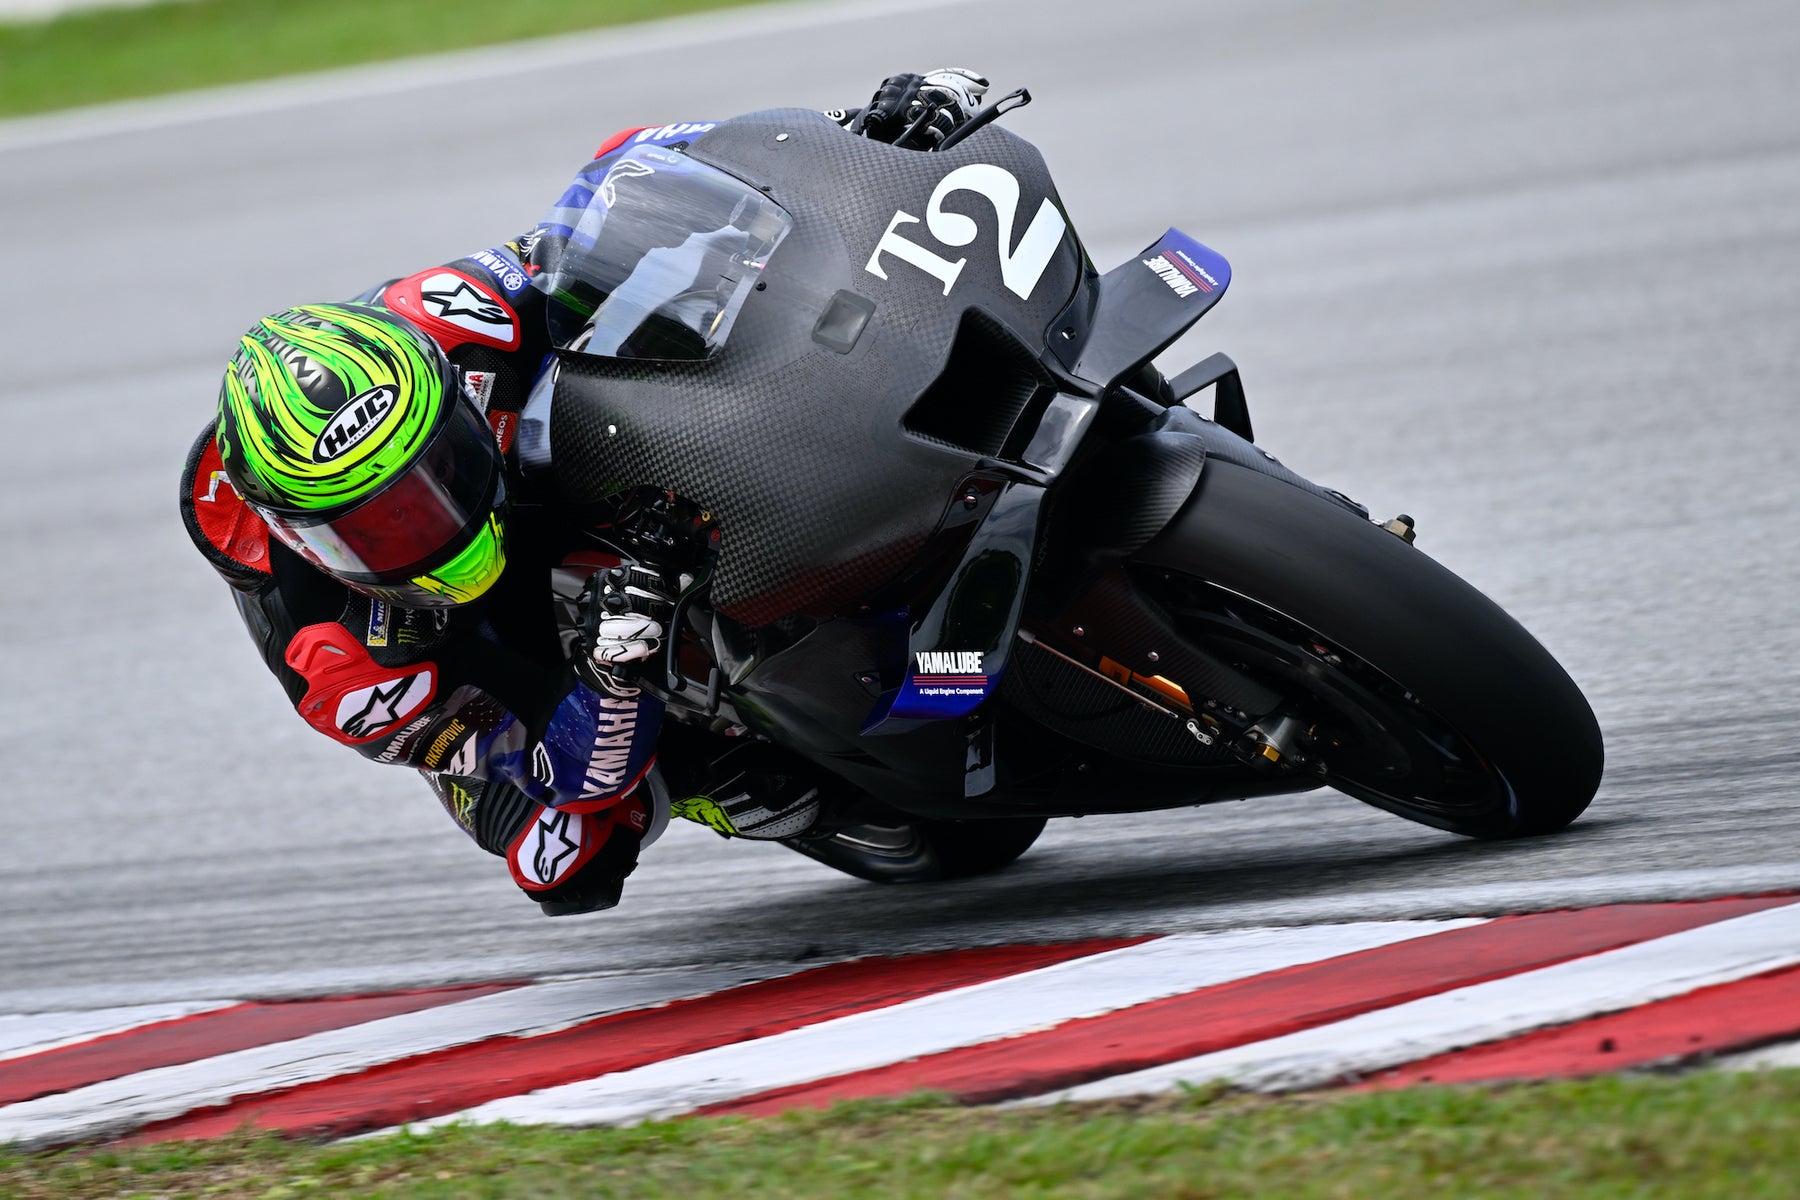 CAL CRUTCHLOW TOPS THE TIMESHEETS ON DAY ONE AND DAY TWO OF THE MOTOGP SHAKEDOWN TEST AT SEPANG